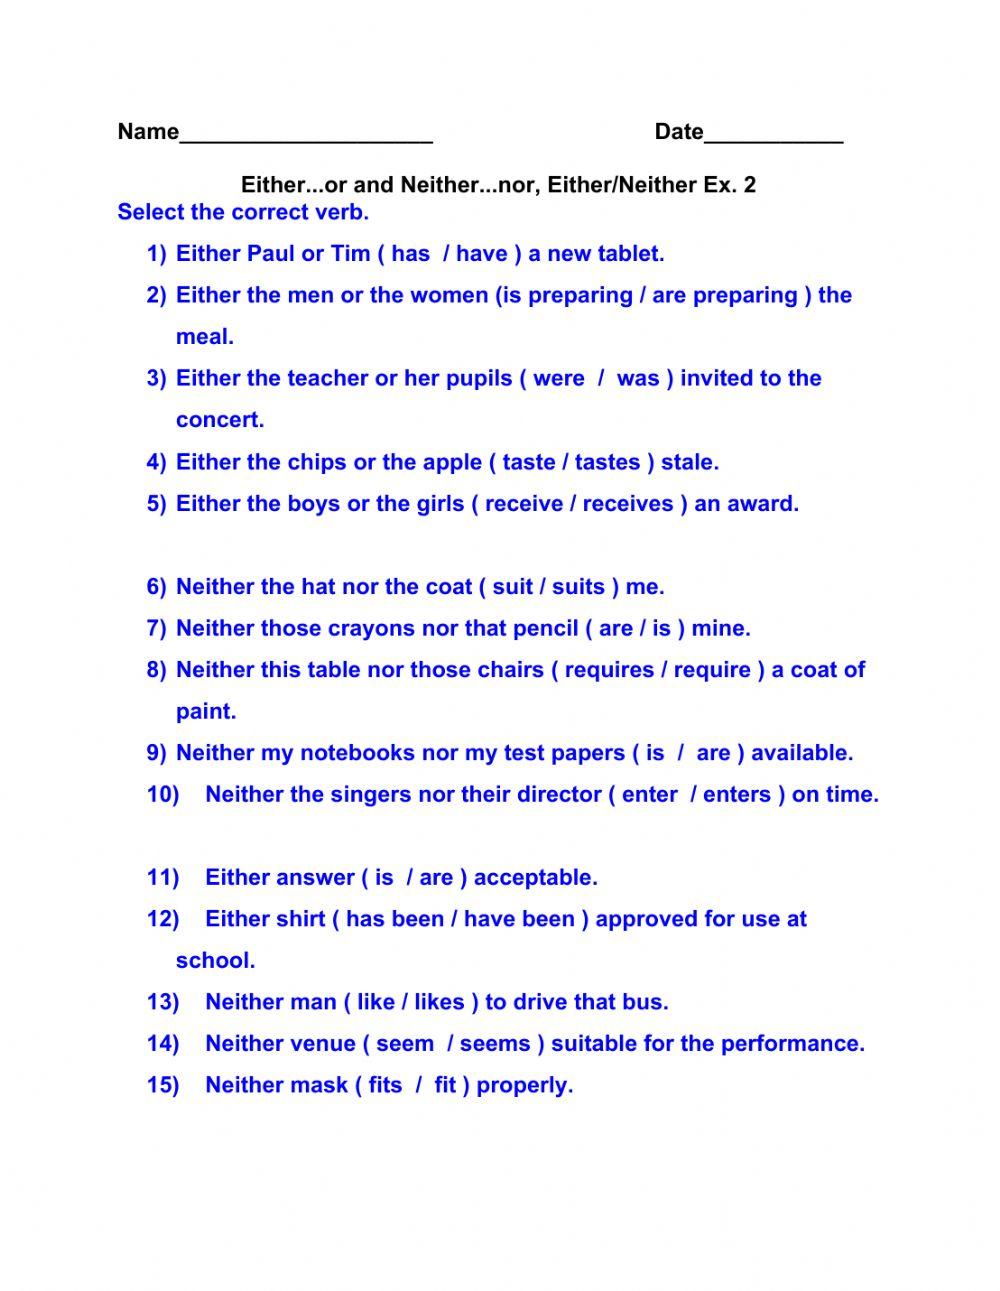 either-or-and-neither-nor-either-neither-ex-2-worksheet-live